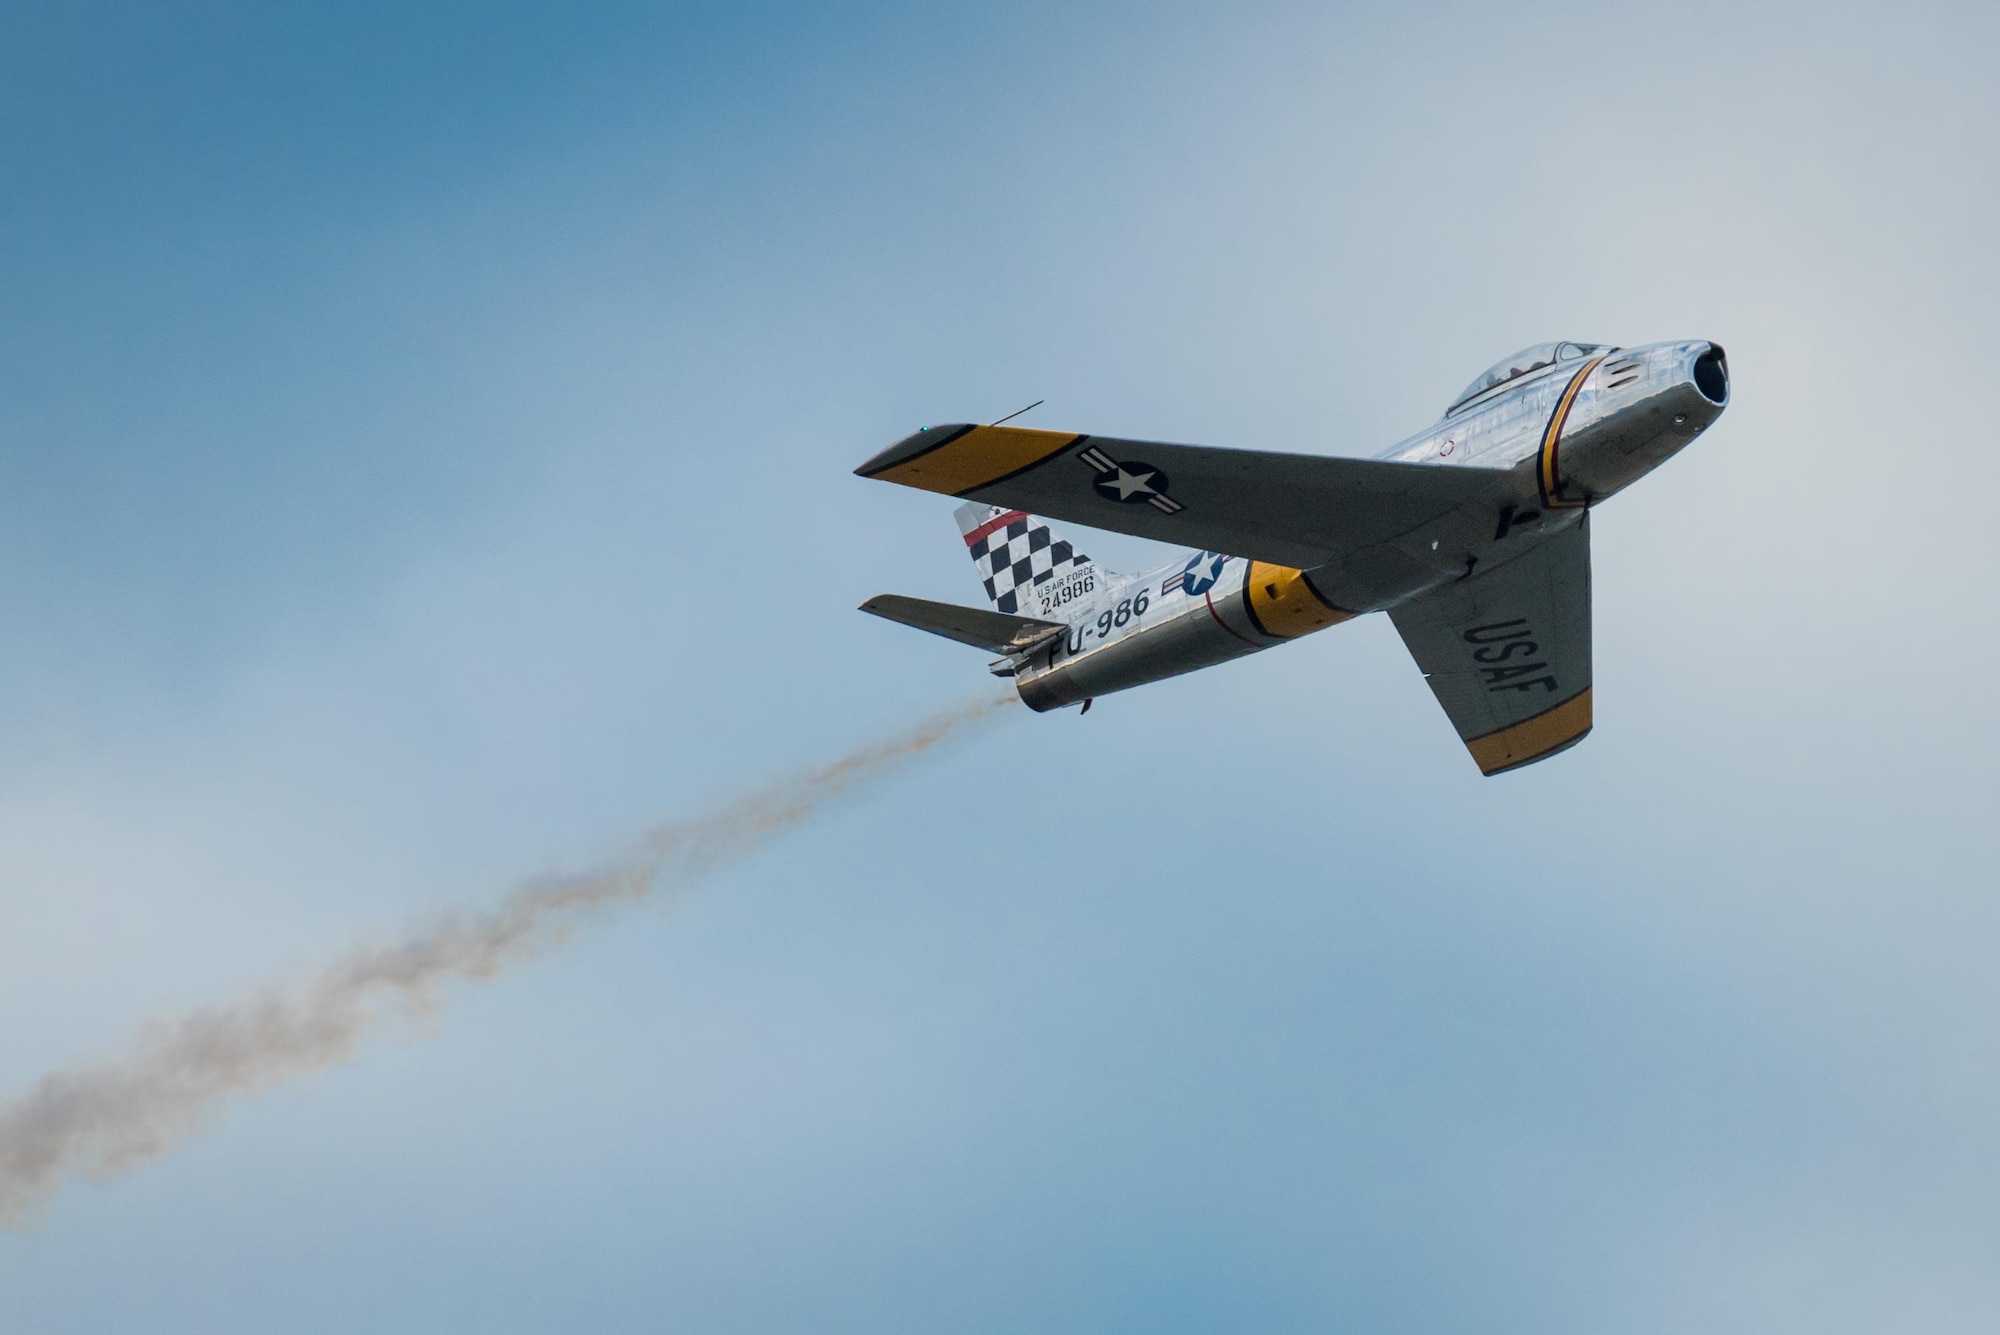 An F-86 Sabre Jet warbird flies an aerial demonstration over the Ohio River during the Thunder Over Louisville air show in Louisville, Ky. April 22, 2017. The annual event has grown to become the largest single-day air show in the nation. (U.S. Air National Guard photo by Lt. Col. Dale Greer)